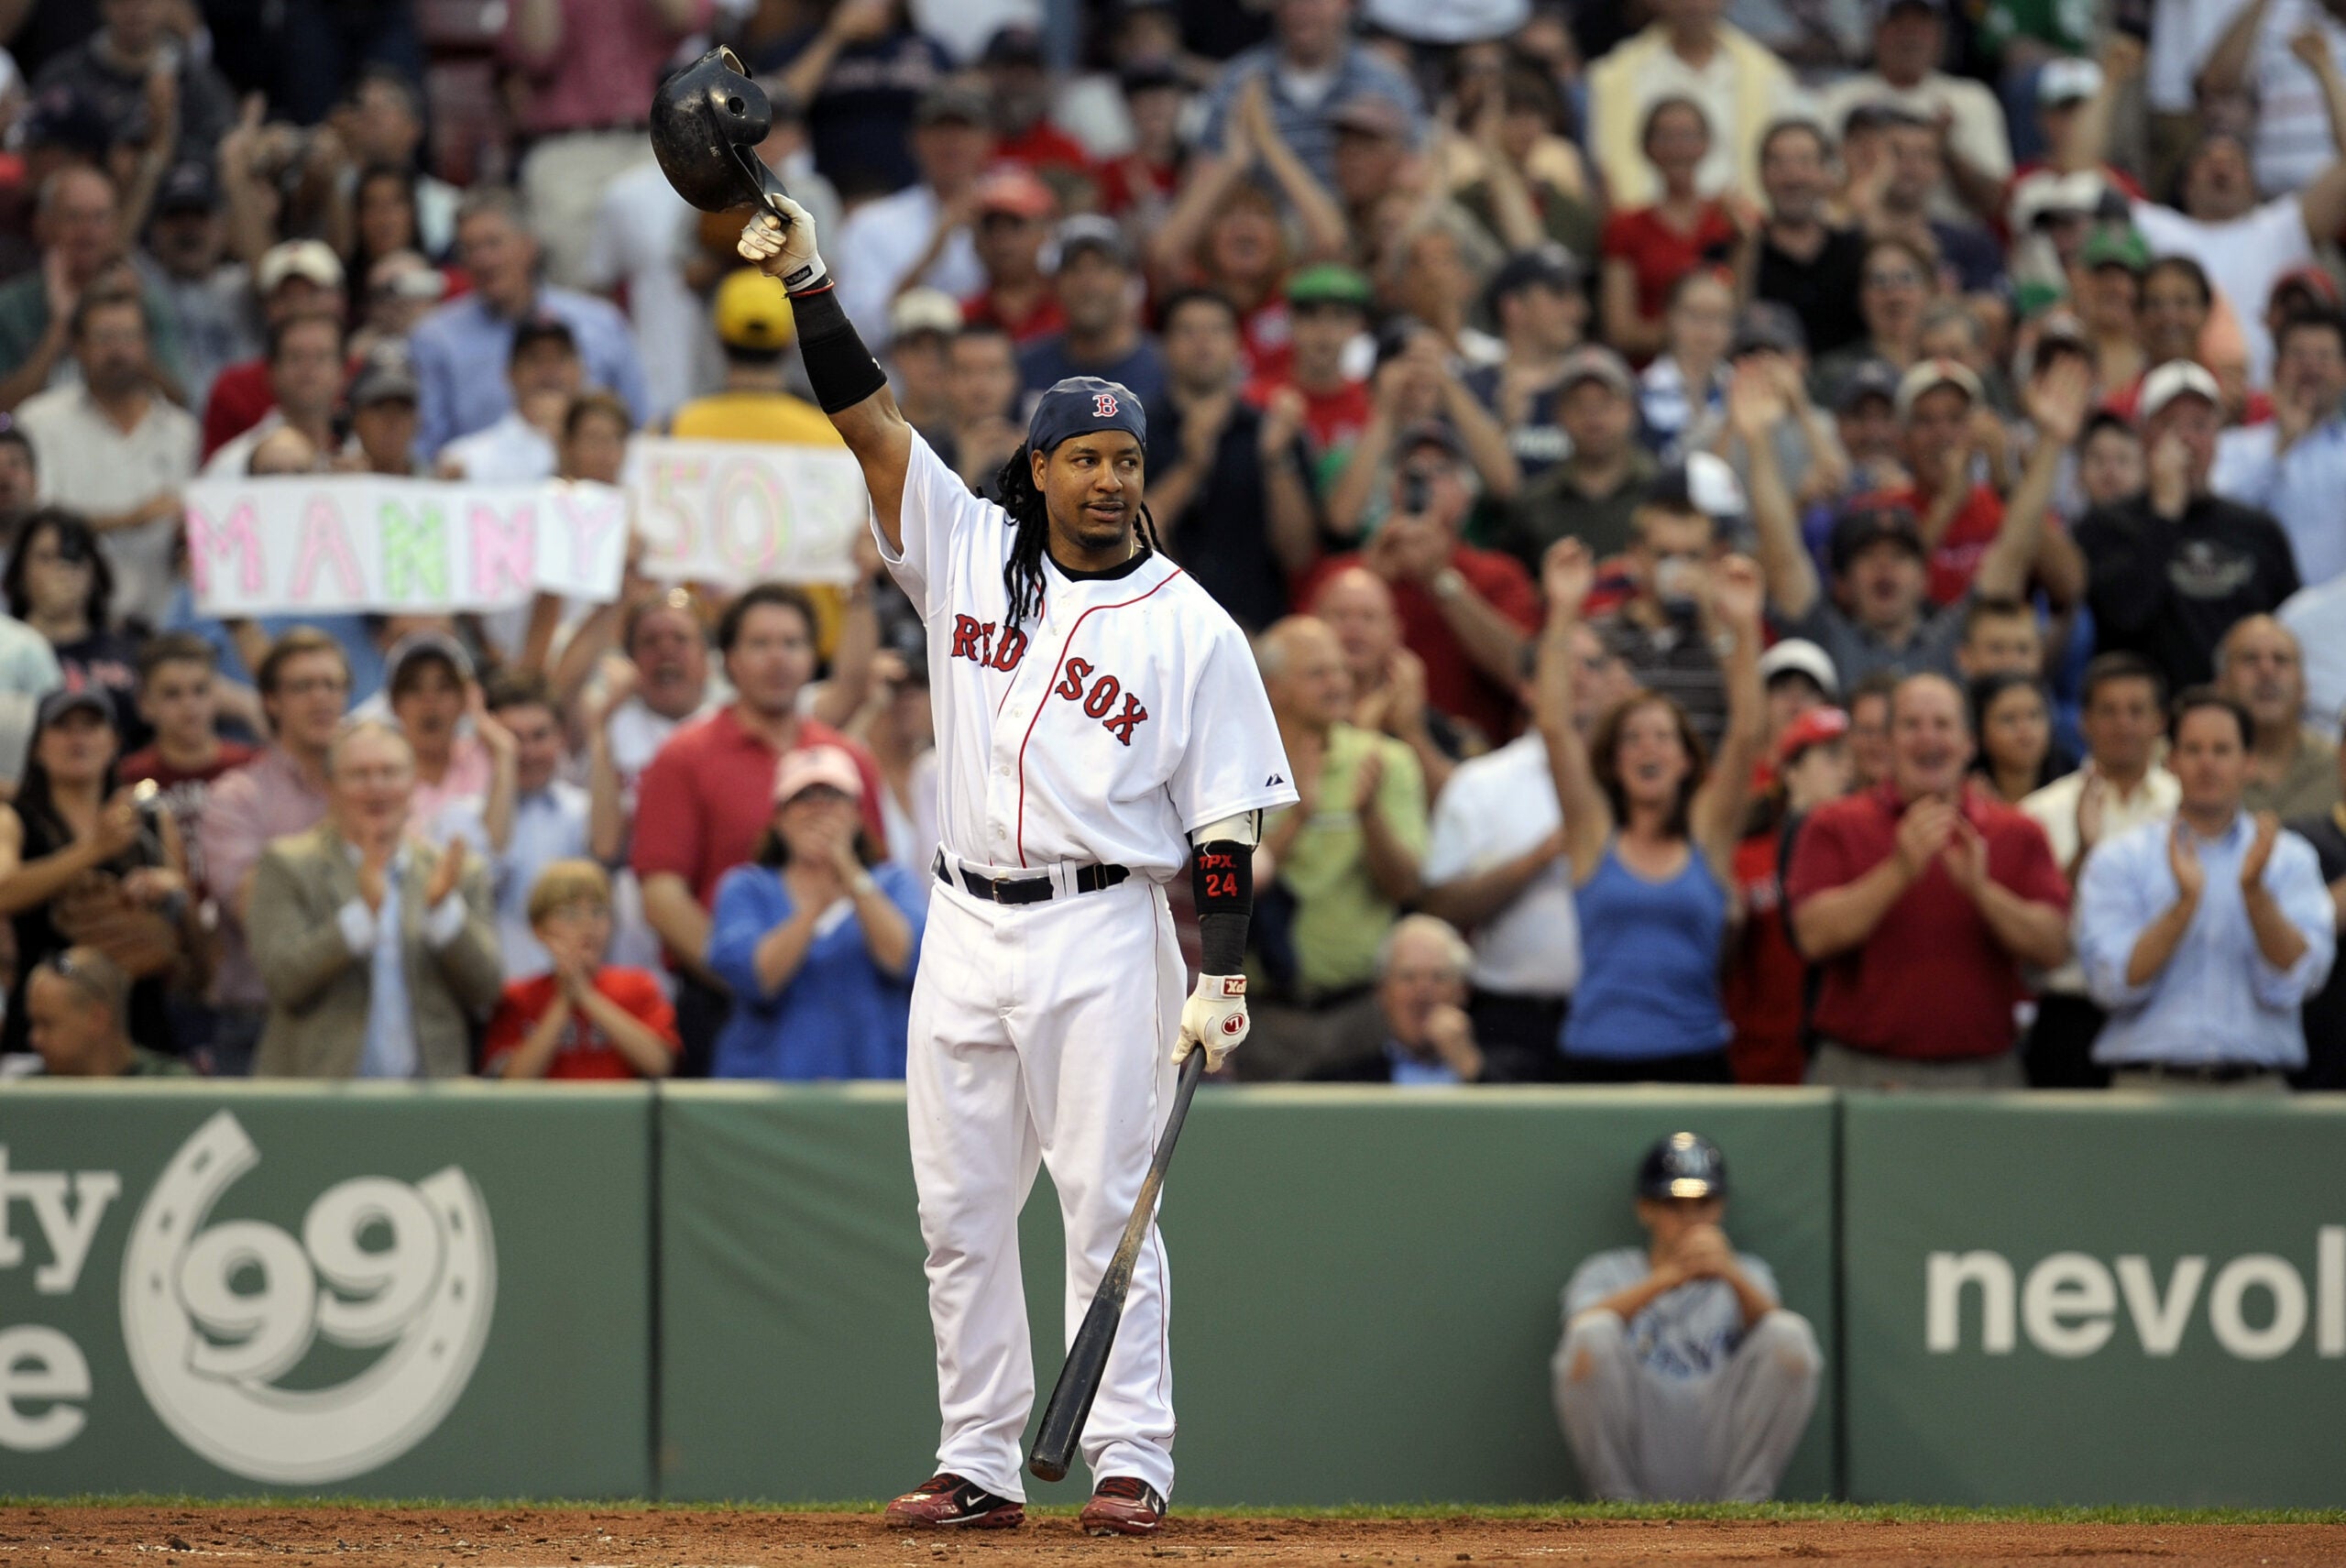 Manny Ramirez was an all-time great hitter, but where exactly does